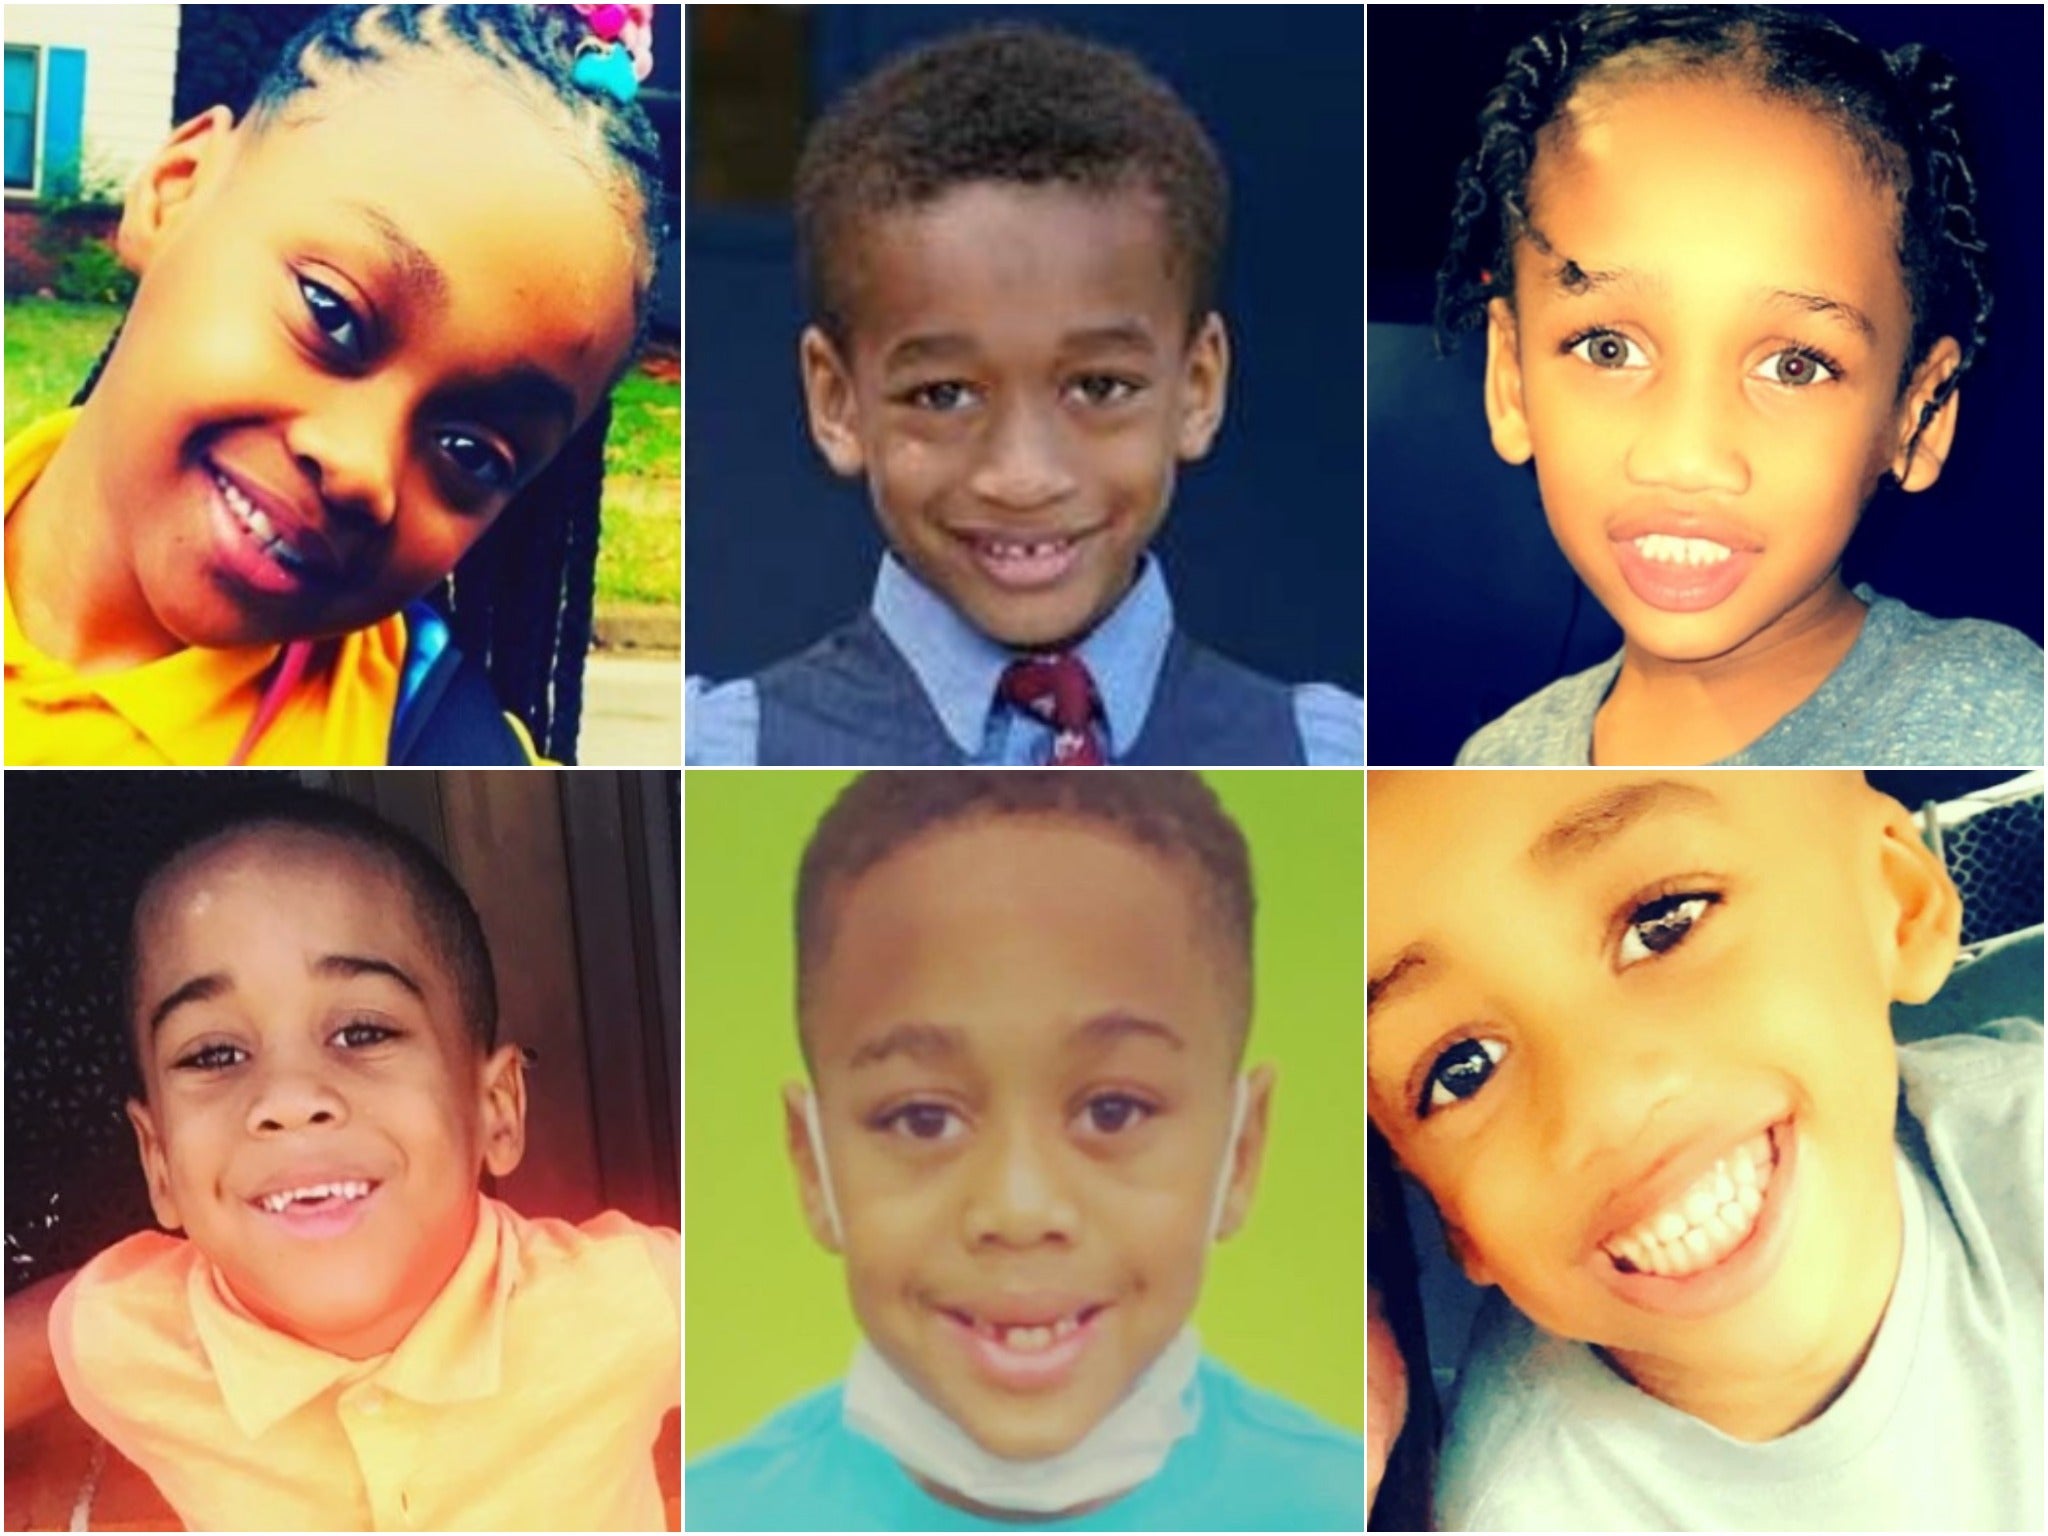 The Tennessee Bureau of Investigation has issued an endangered child alert for six siblings